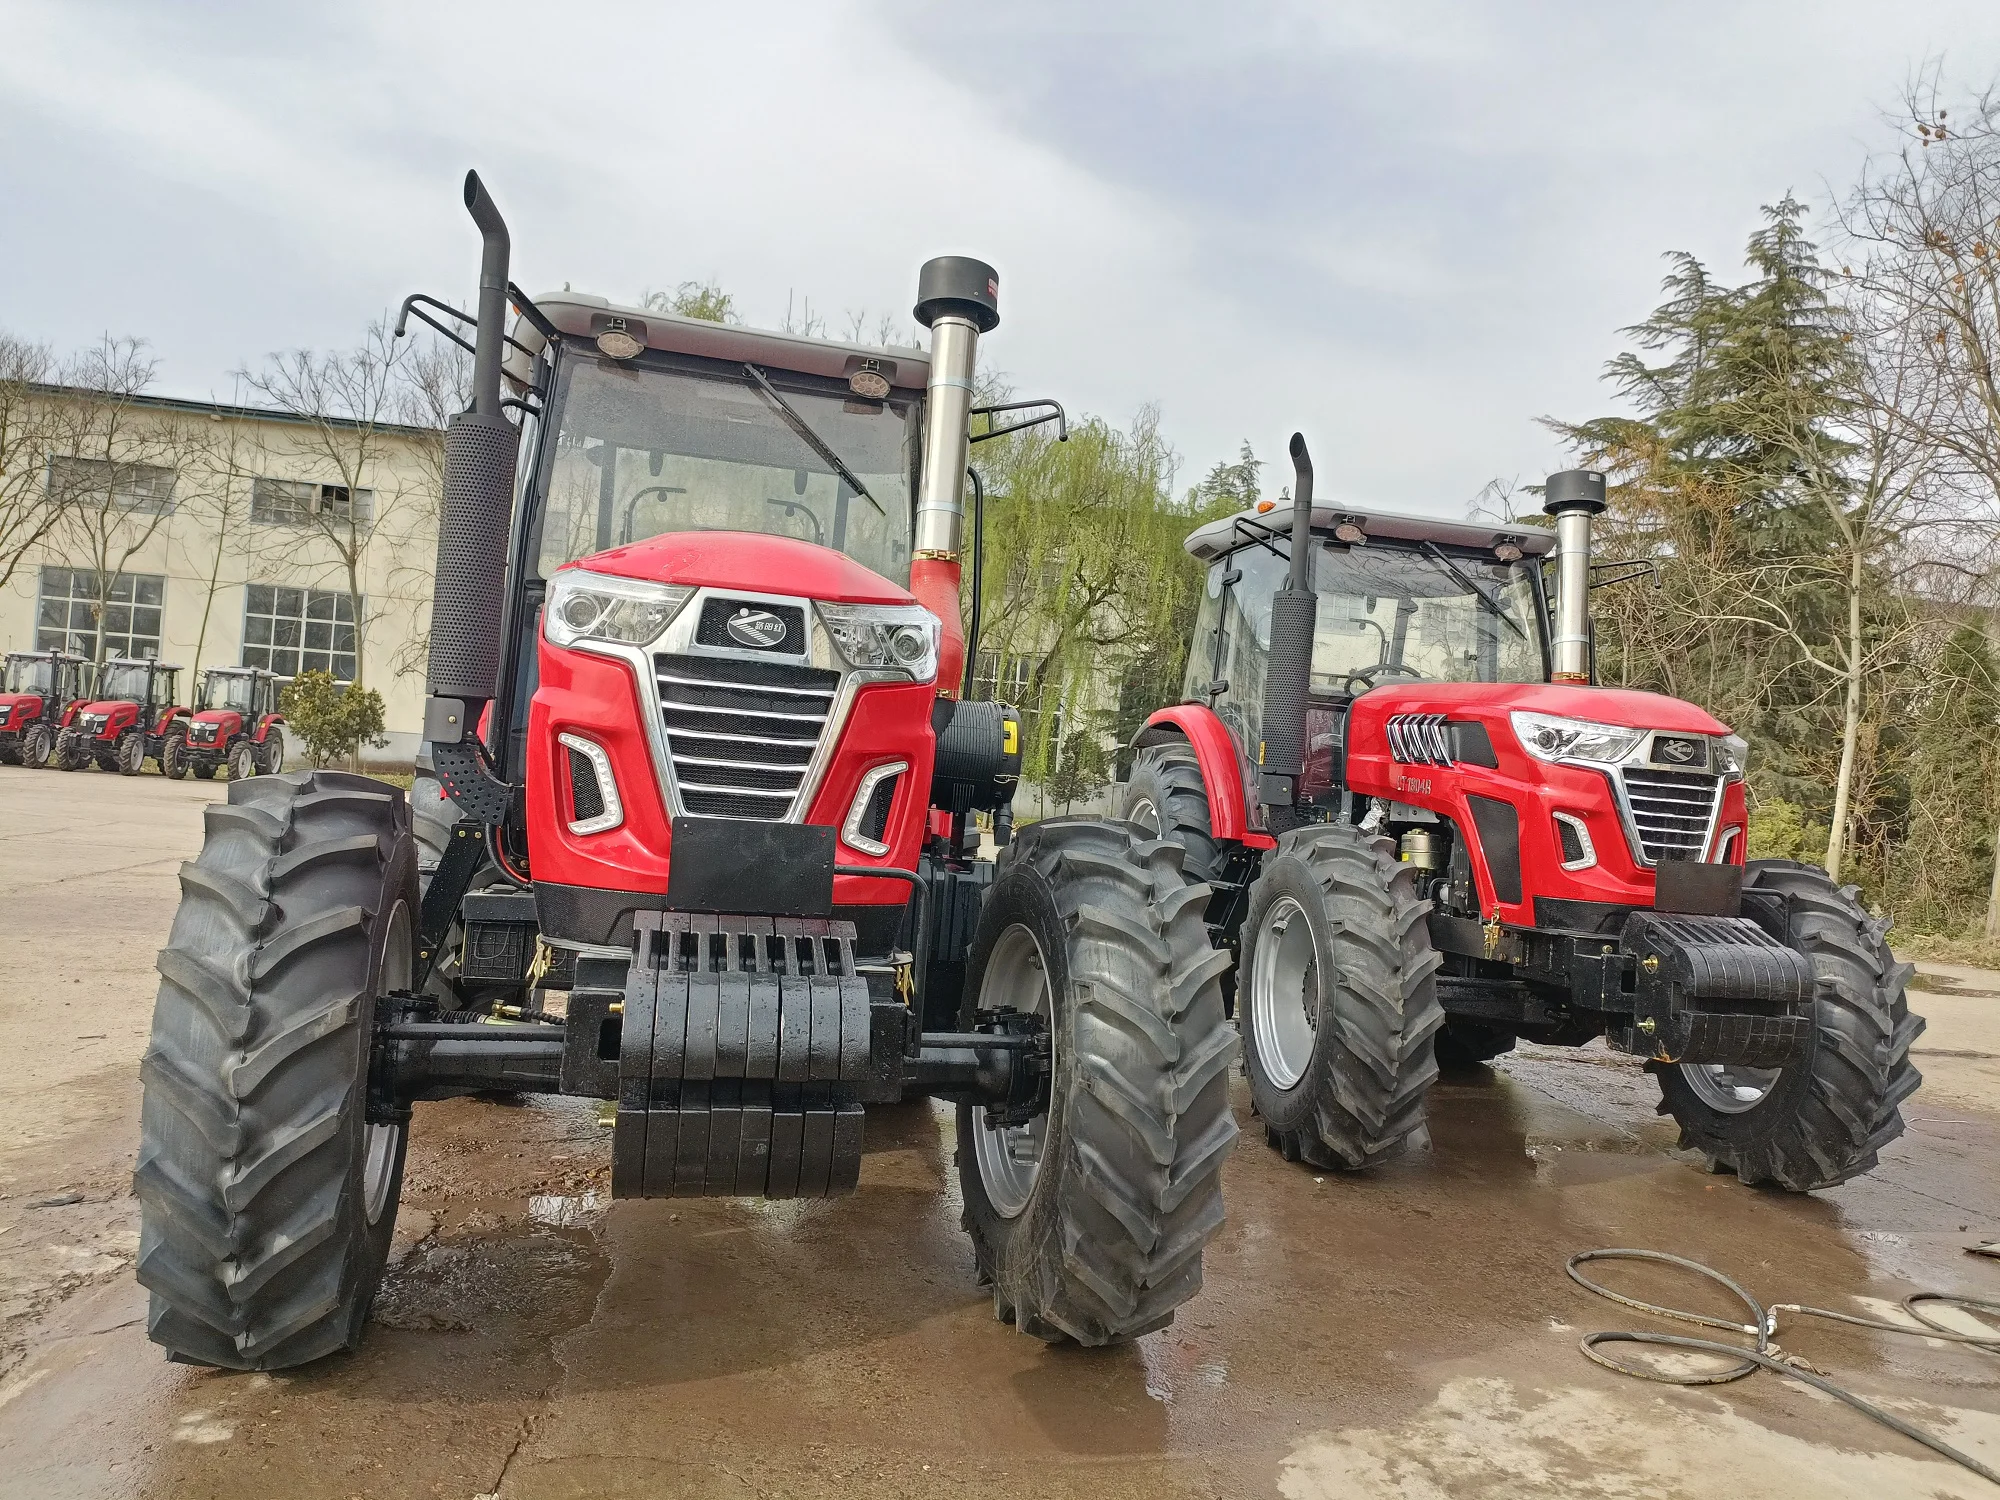 2 units Lutong 180HP Tractor LT1804B Export to Turkmenistan